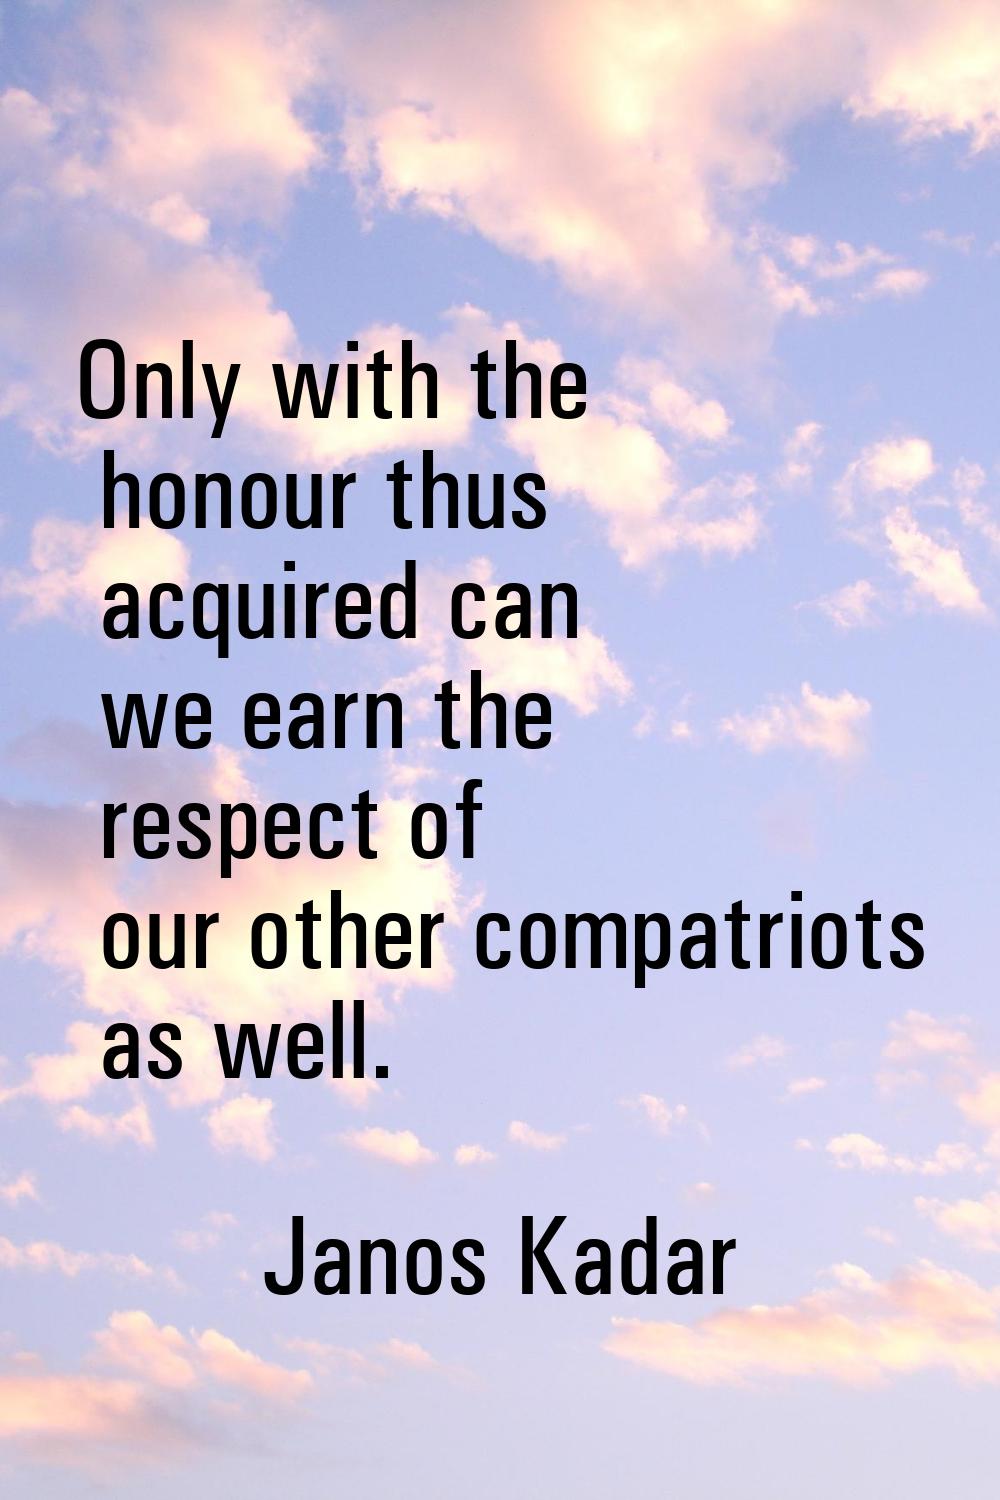 Only with the honour thus acquired can we earn the respect of our other compatriots as well.